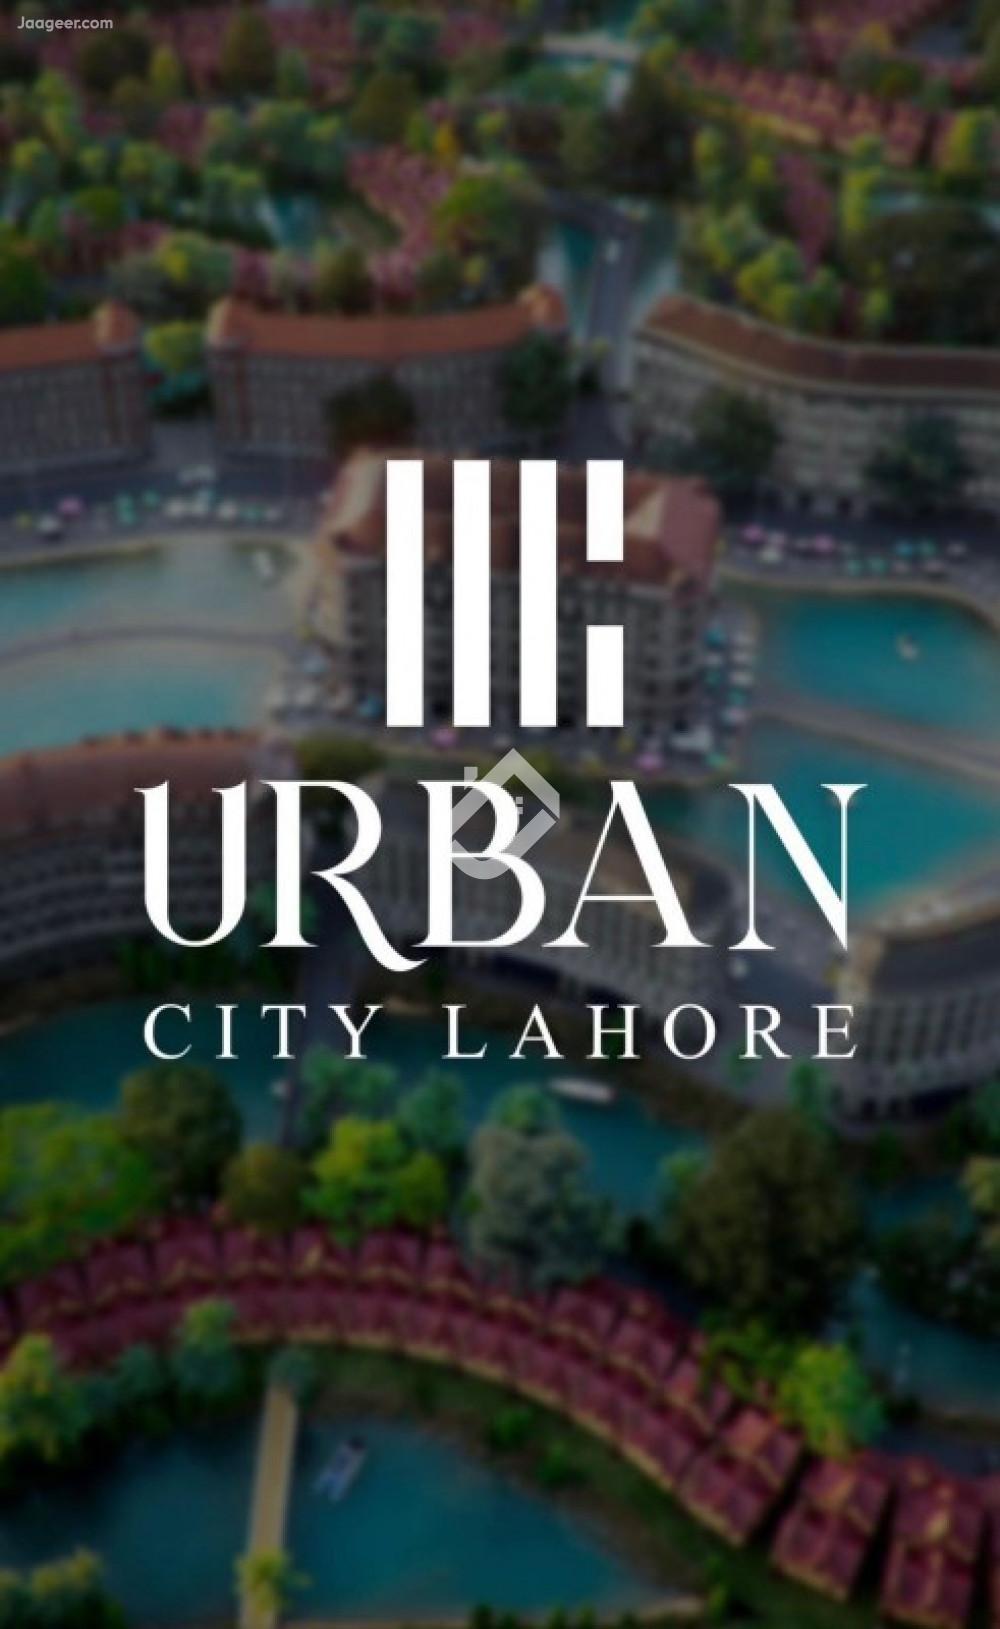 View  3 Marla Residential Plot  For Sale In Urban City   in Urban City  , Lahore